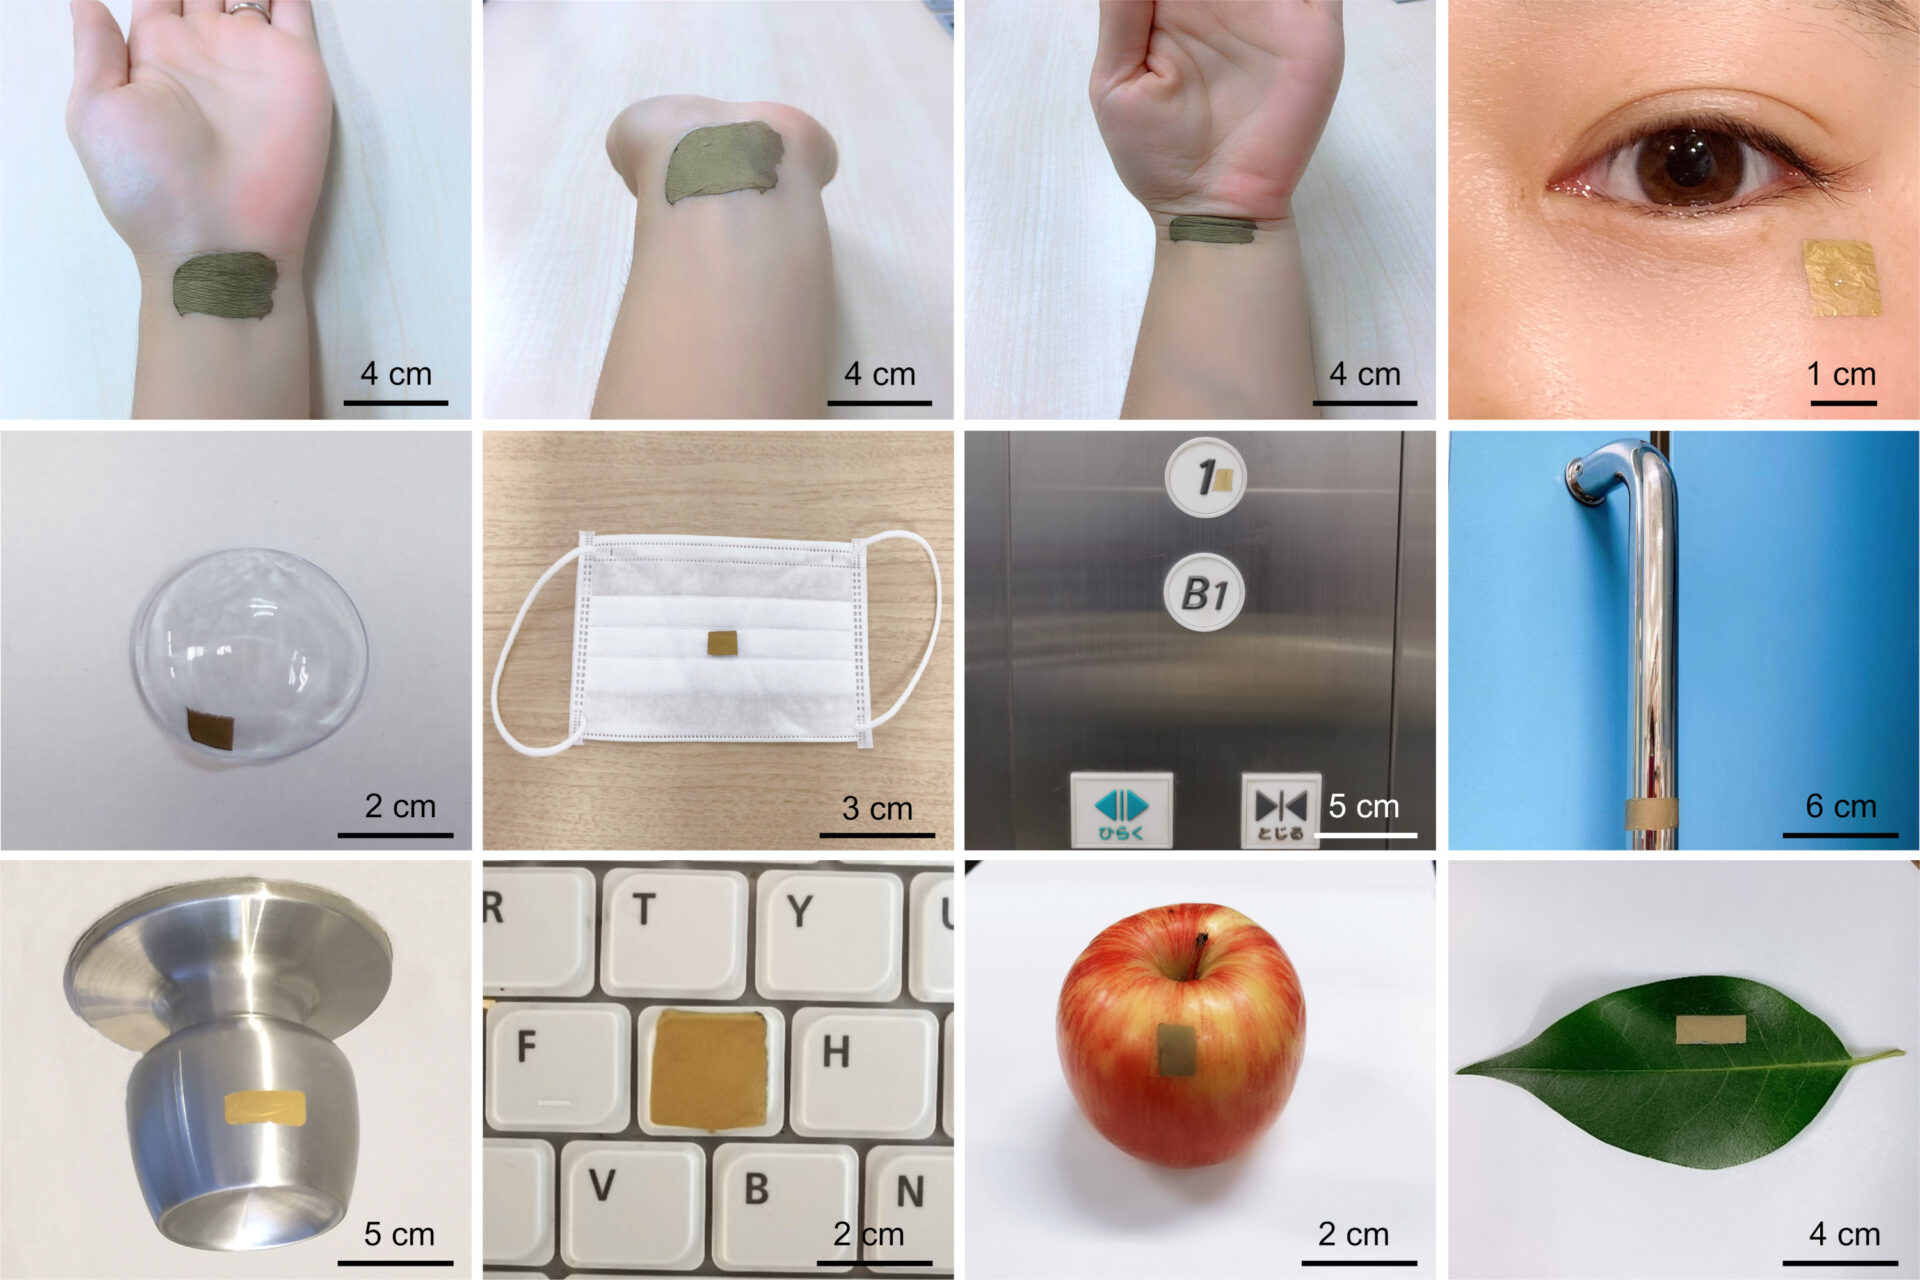 Stretchy sensor. Although very thin, the gold nanomesh sensor is very durable and can be stretched and deformed without breaking. Therefore, it can be adhered to many different kinds of surfaces — not just human skin — for different sensing purposes. Credit: Goda et al.